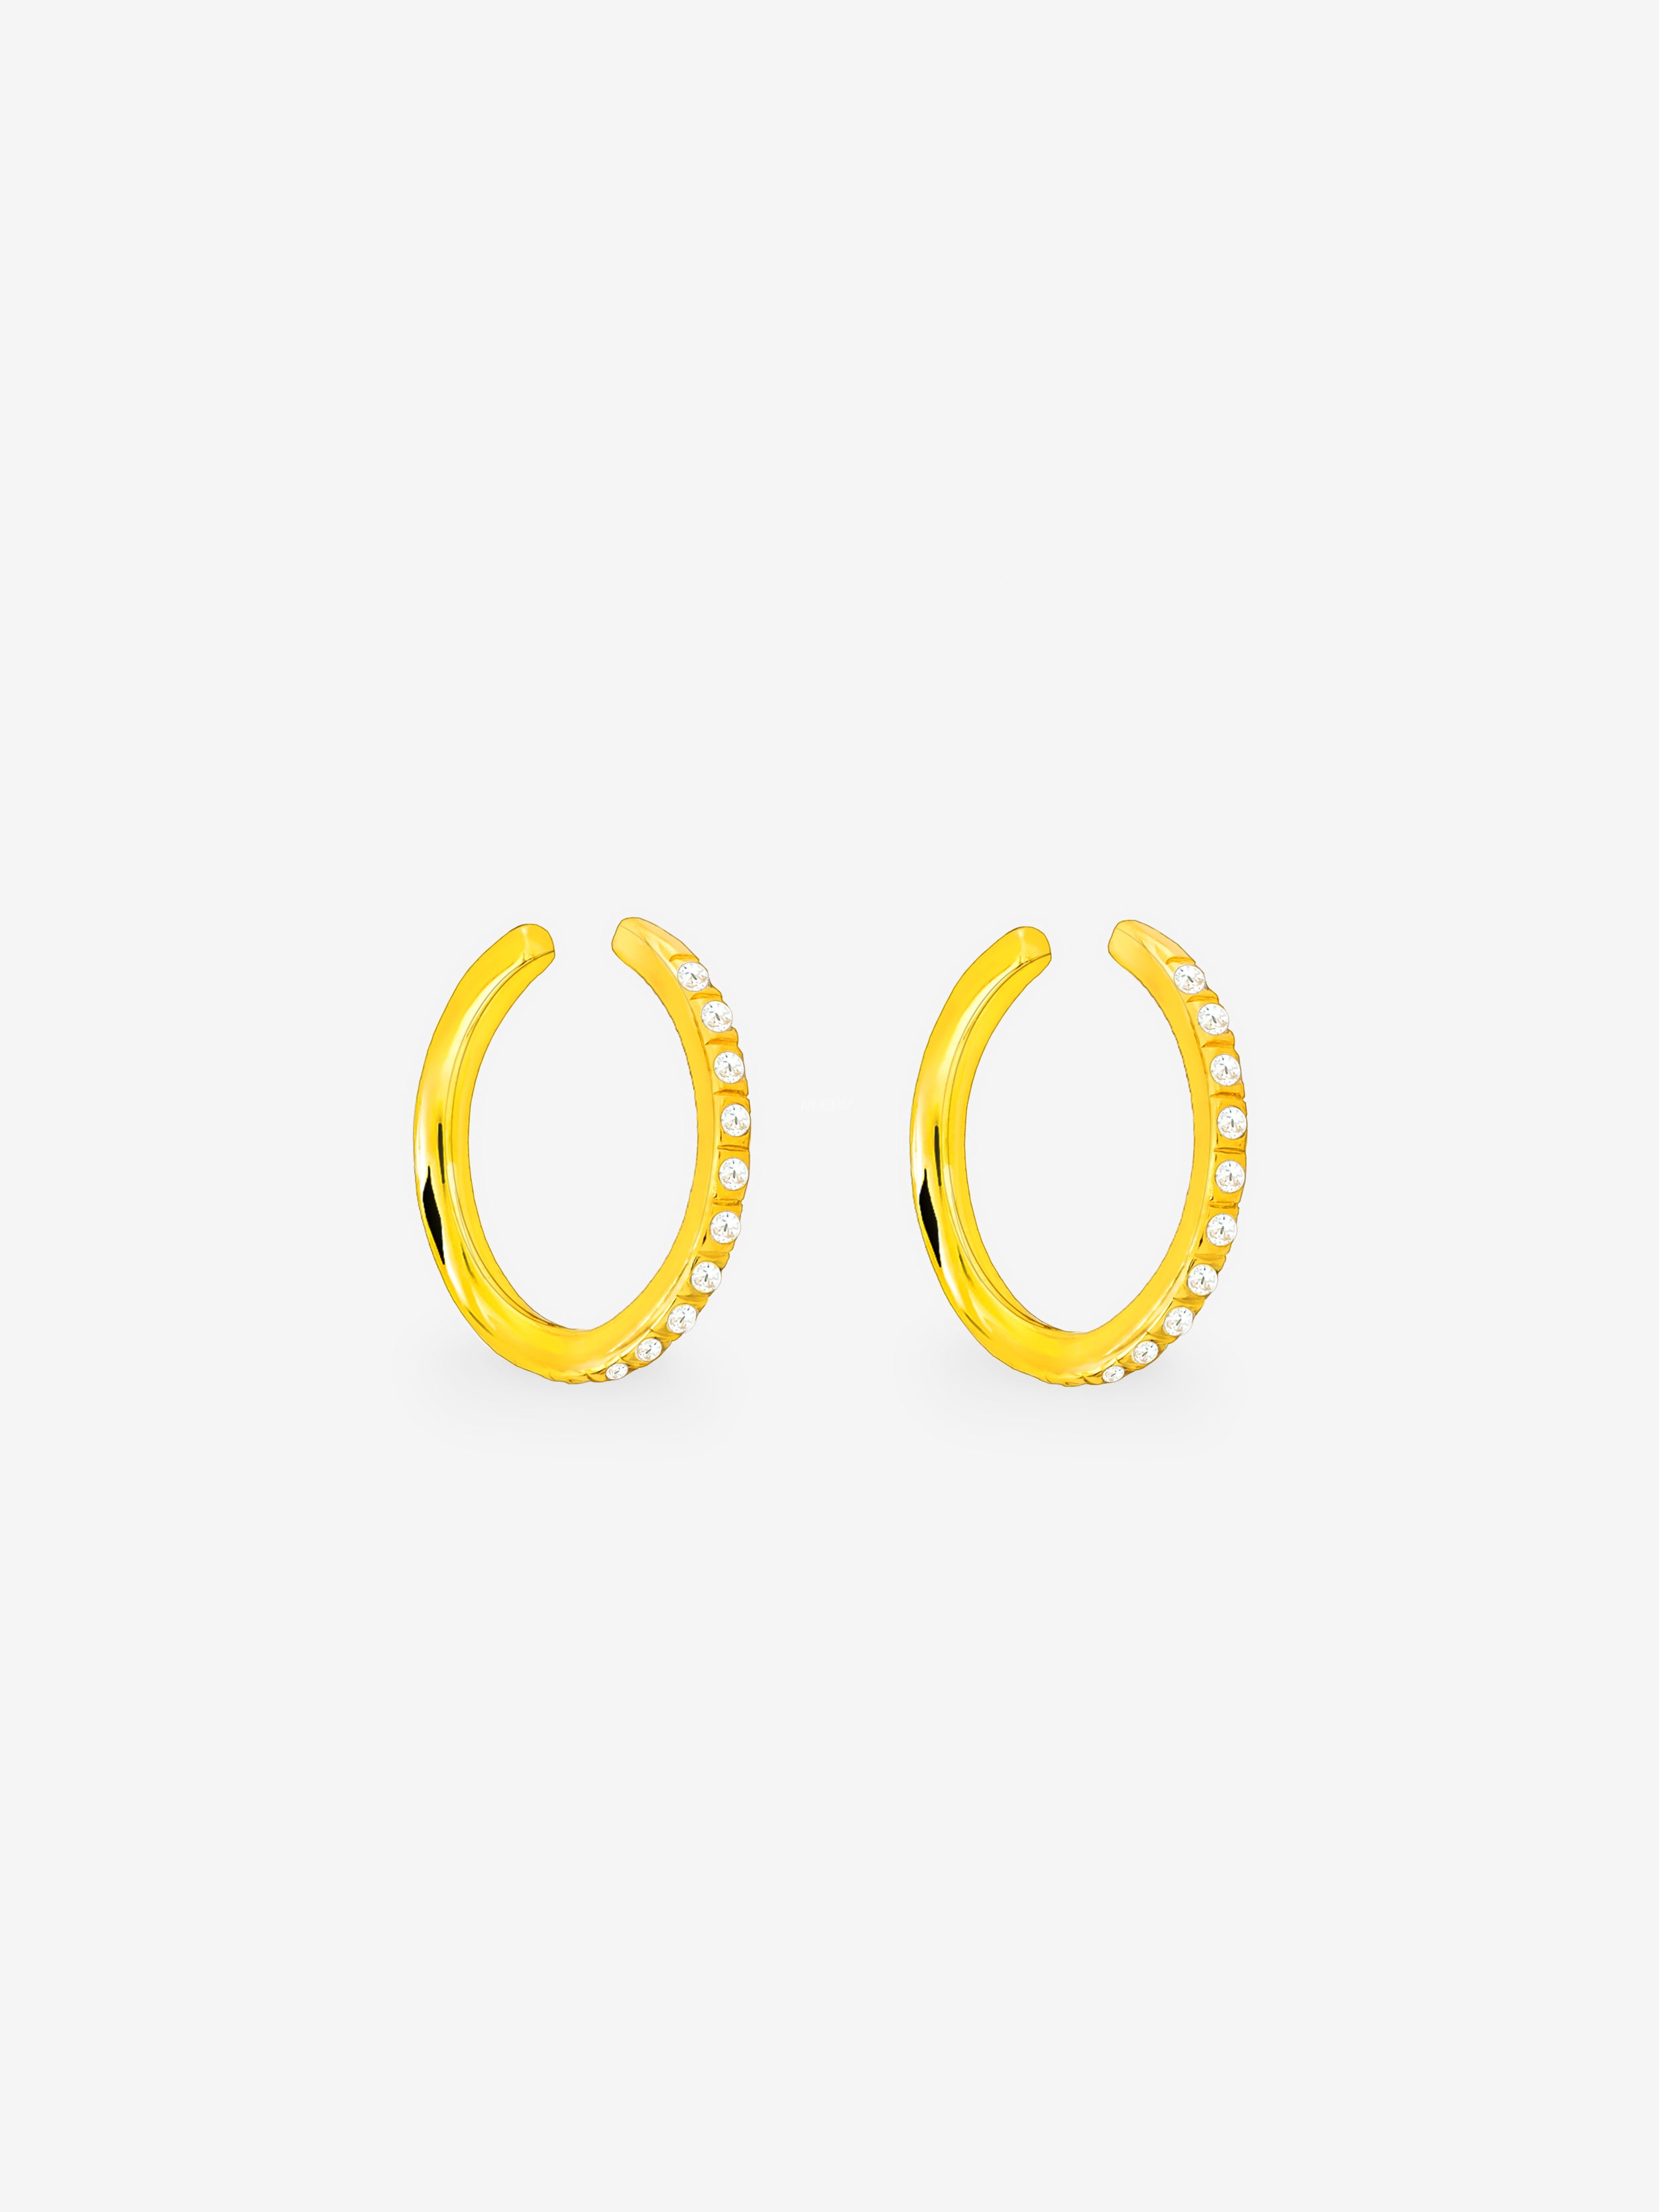 Gold Thin Ear Cuffs With Stones - Pair